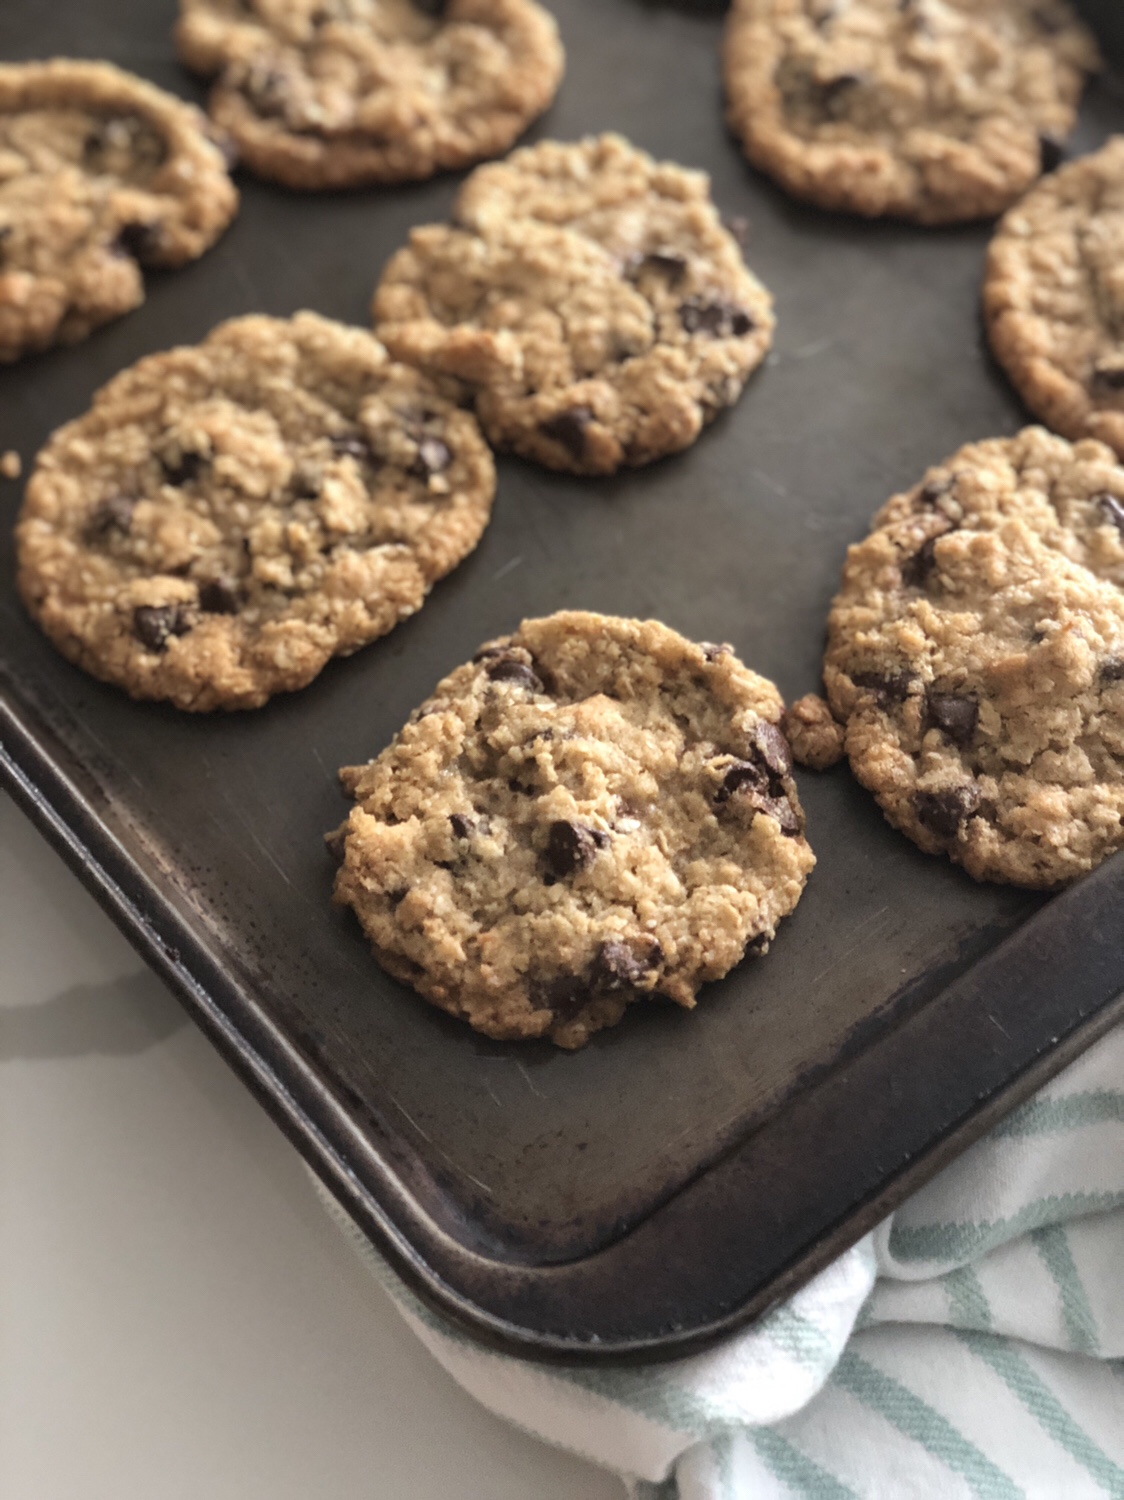 My Favourite Cookies- Oatmeal Chocolate Chip with a twist